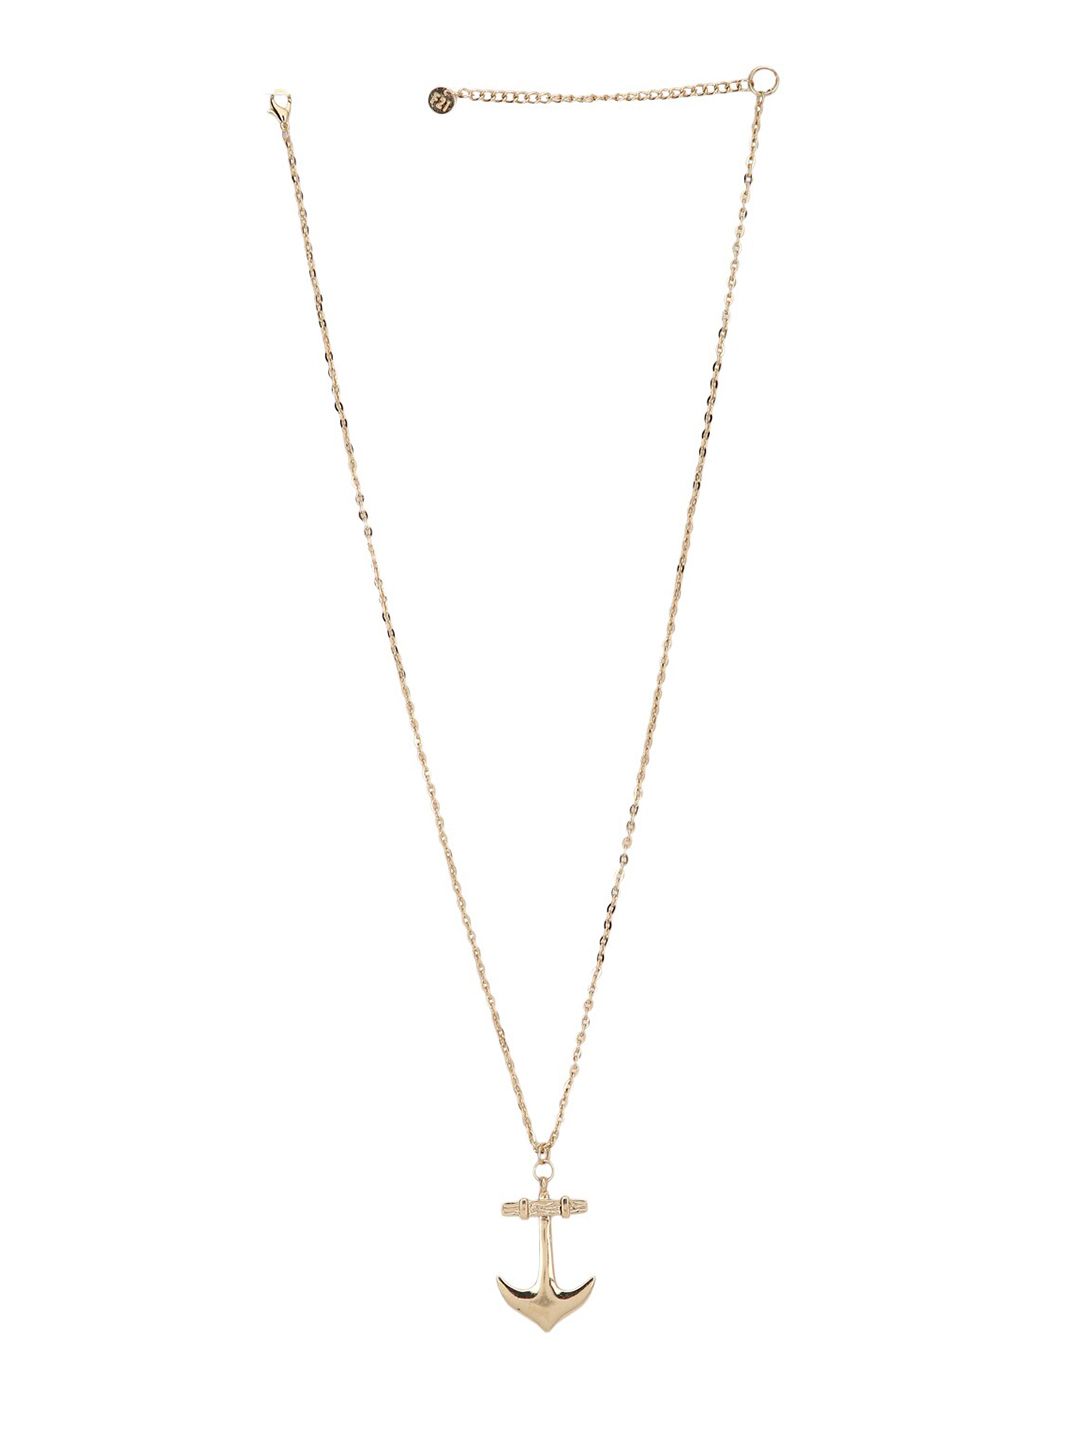 FOREVER 21 Gold-Toned Minimal Chain Necklace Price in India